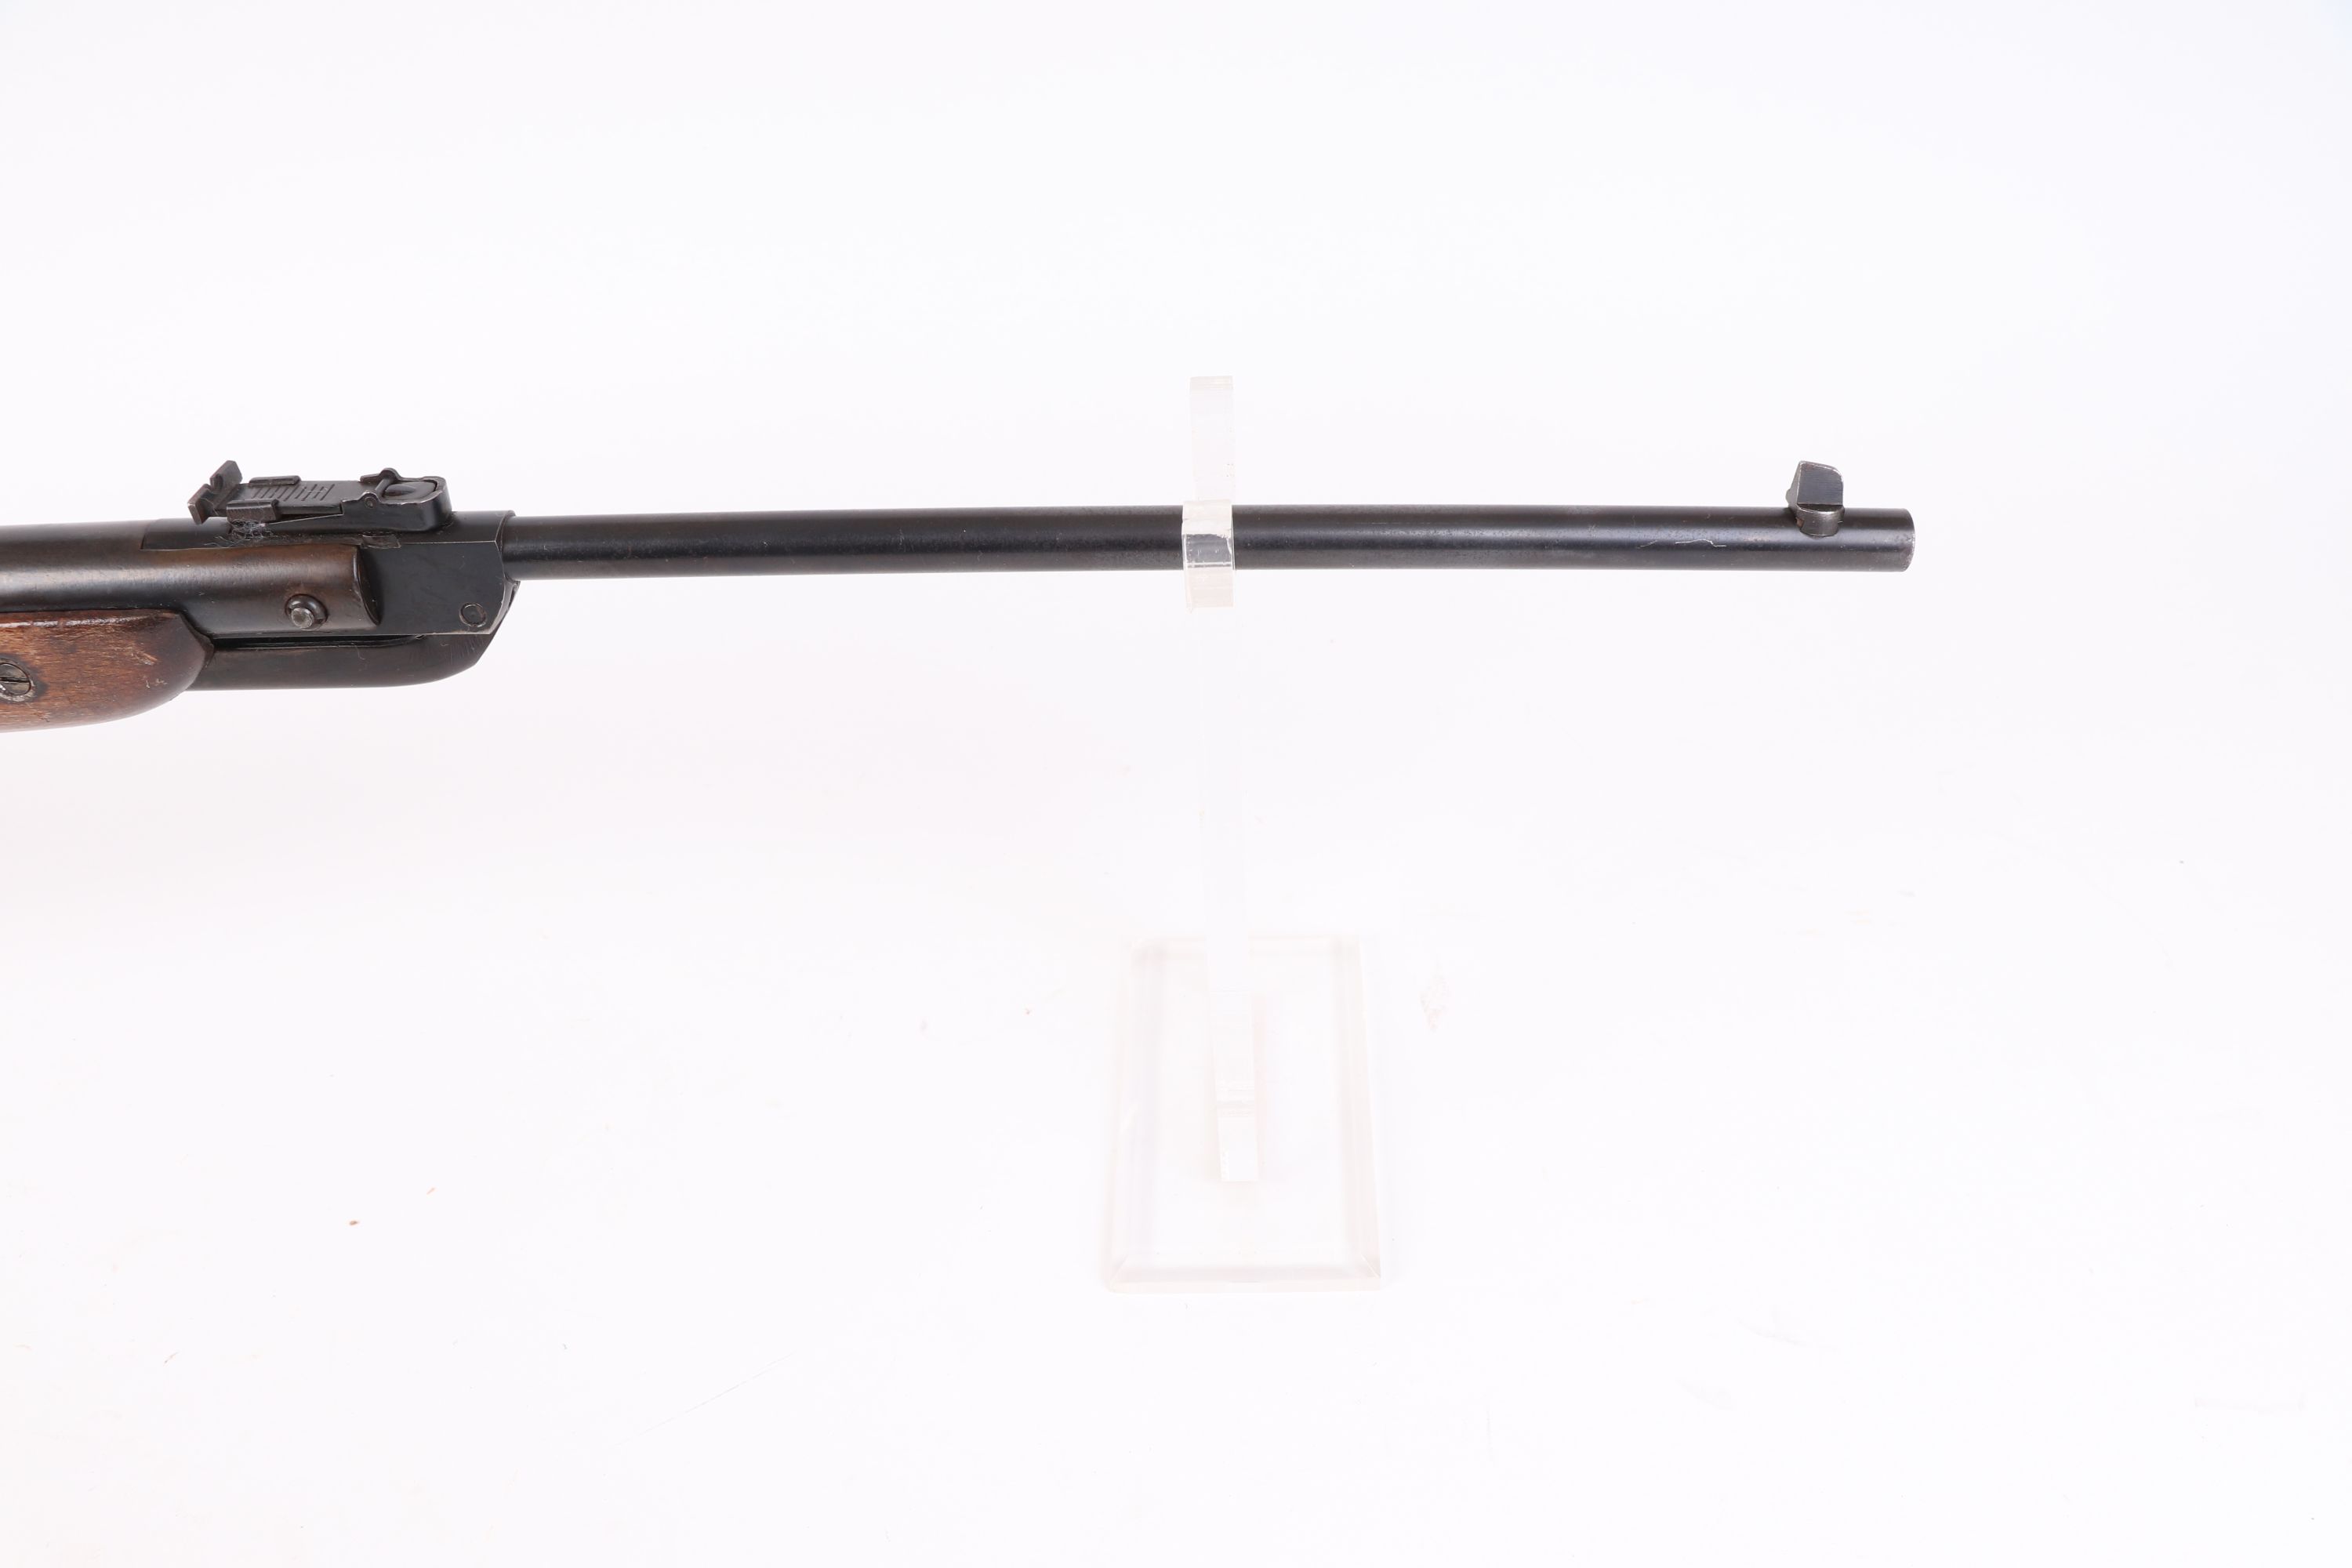 .177 Falke Mod 50 break barrel air rifle, open sights, nvn [Purchasers note: Collection in person o - Image 4 of 4